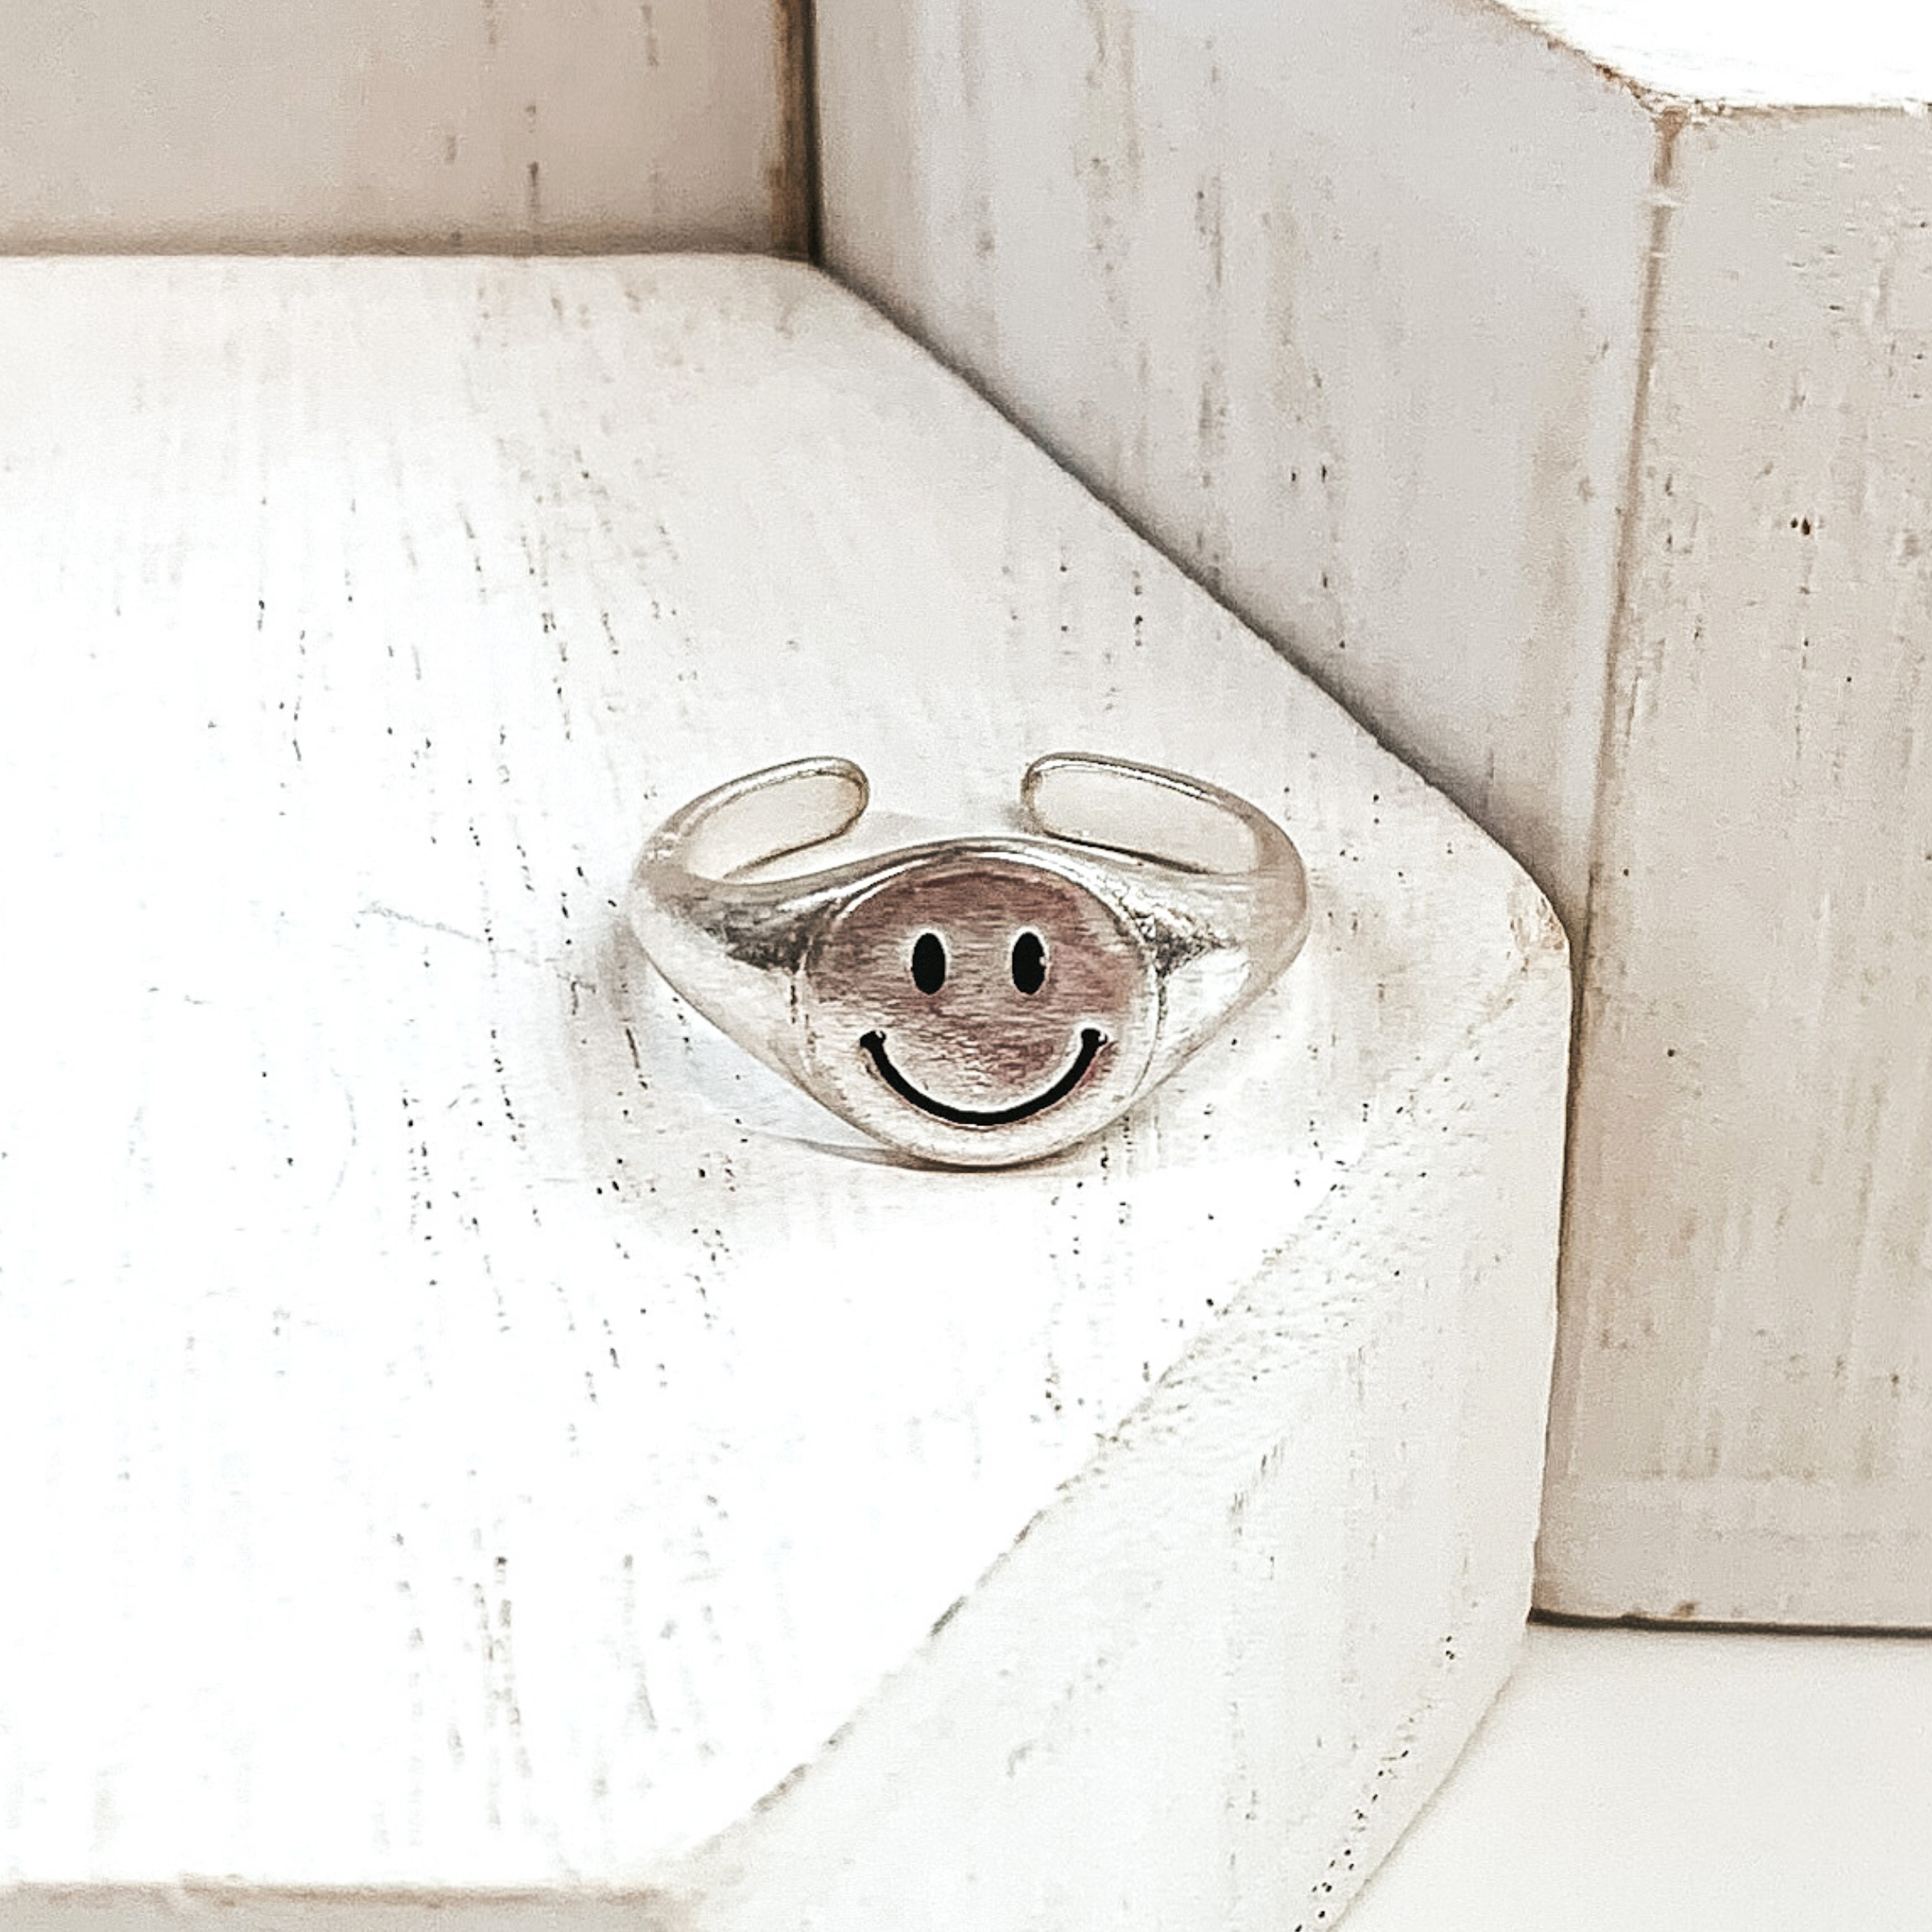 Silver, non adjustable ring with a round smiley face. This ring is pictured on a white block with more white blocks in the background. 